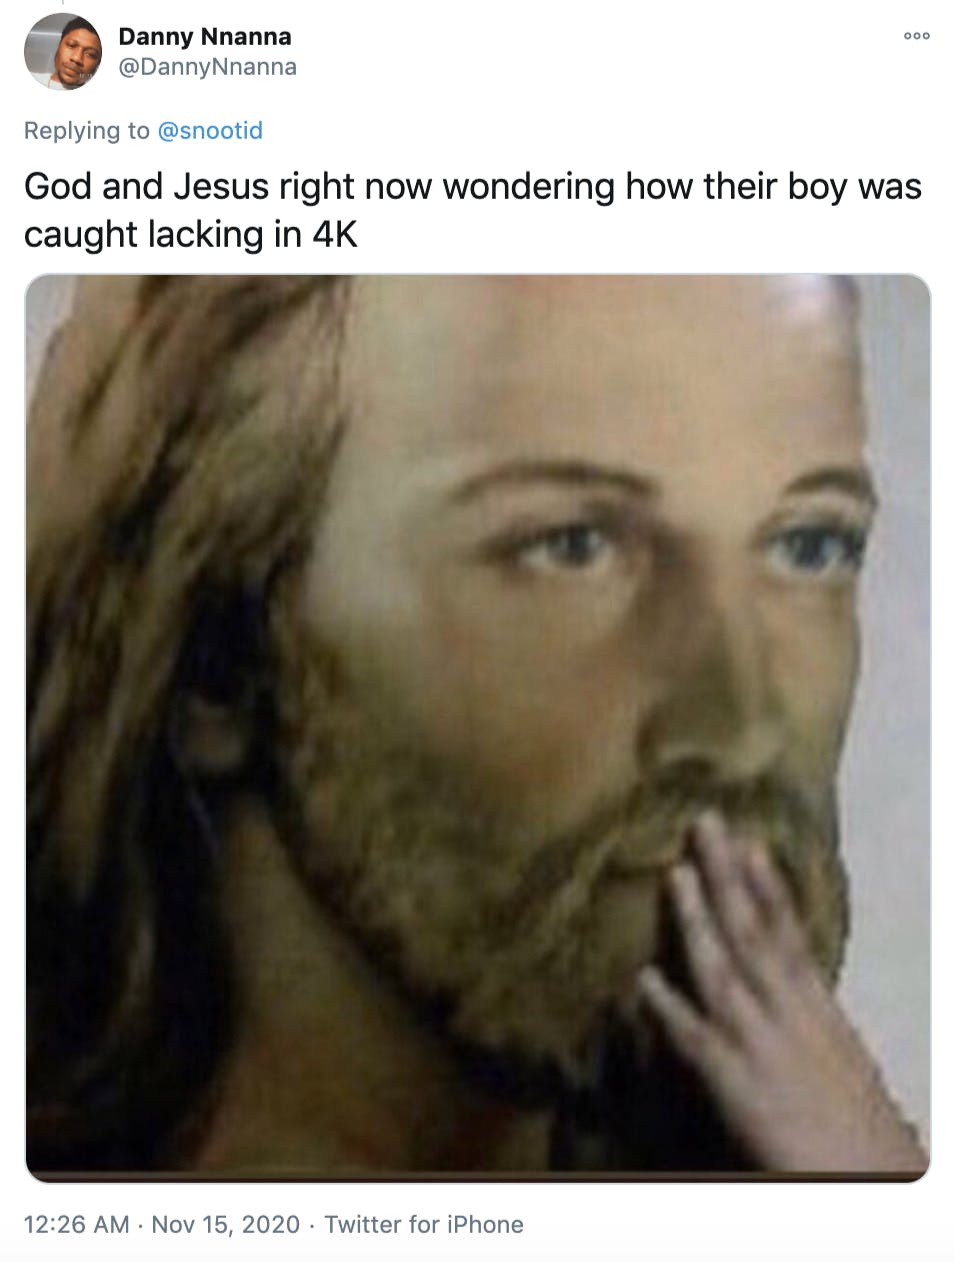 'God and Jesus right now wondering how their boy was caught lacking in 4K' image of Jesus with a disproportionally small hand pressed to his mouth in a delighted by scandal way